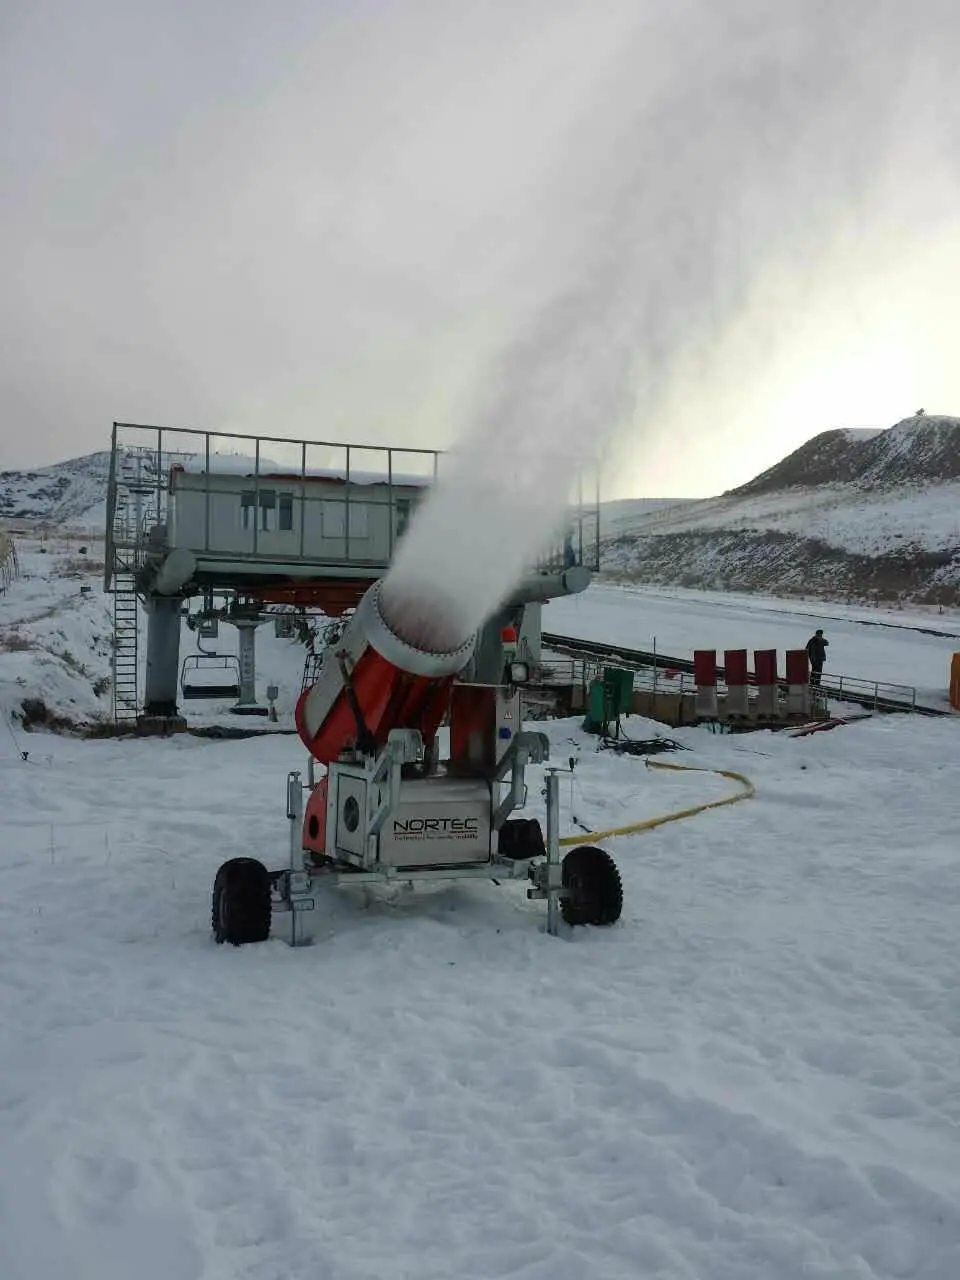 Snow gun plans - homemade snow maker cannon - SNOW!!! - Plans will be  emailed